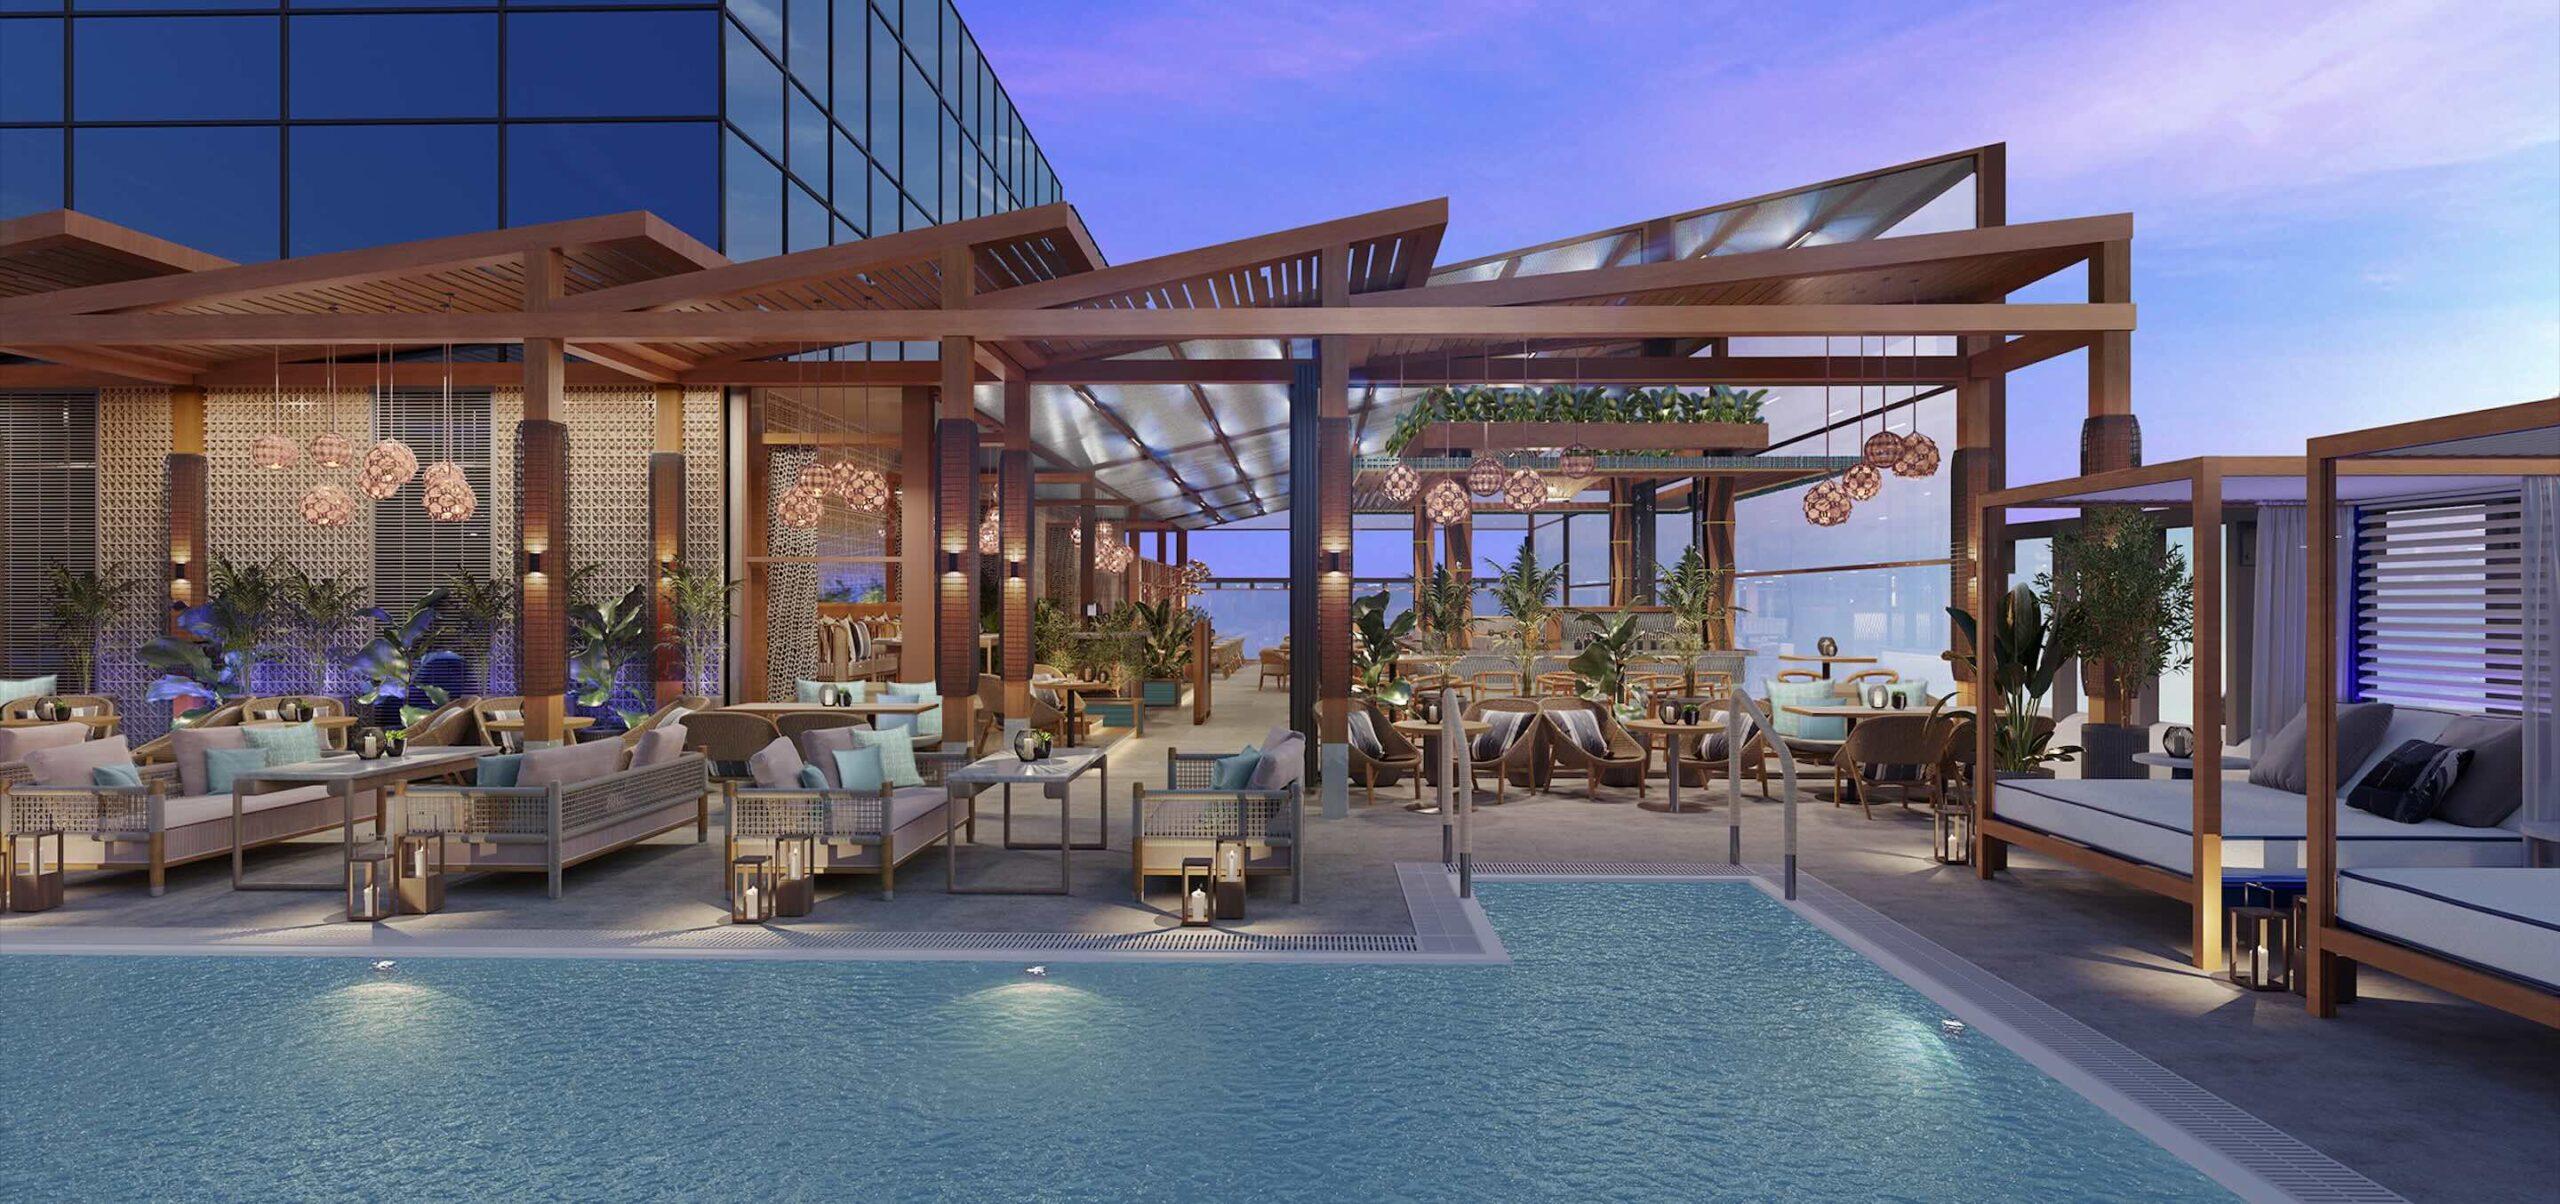 Siddharta Lounge is opening a rooftop restaurant in Jeddah